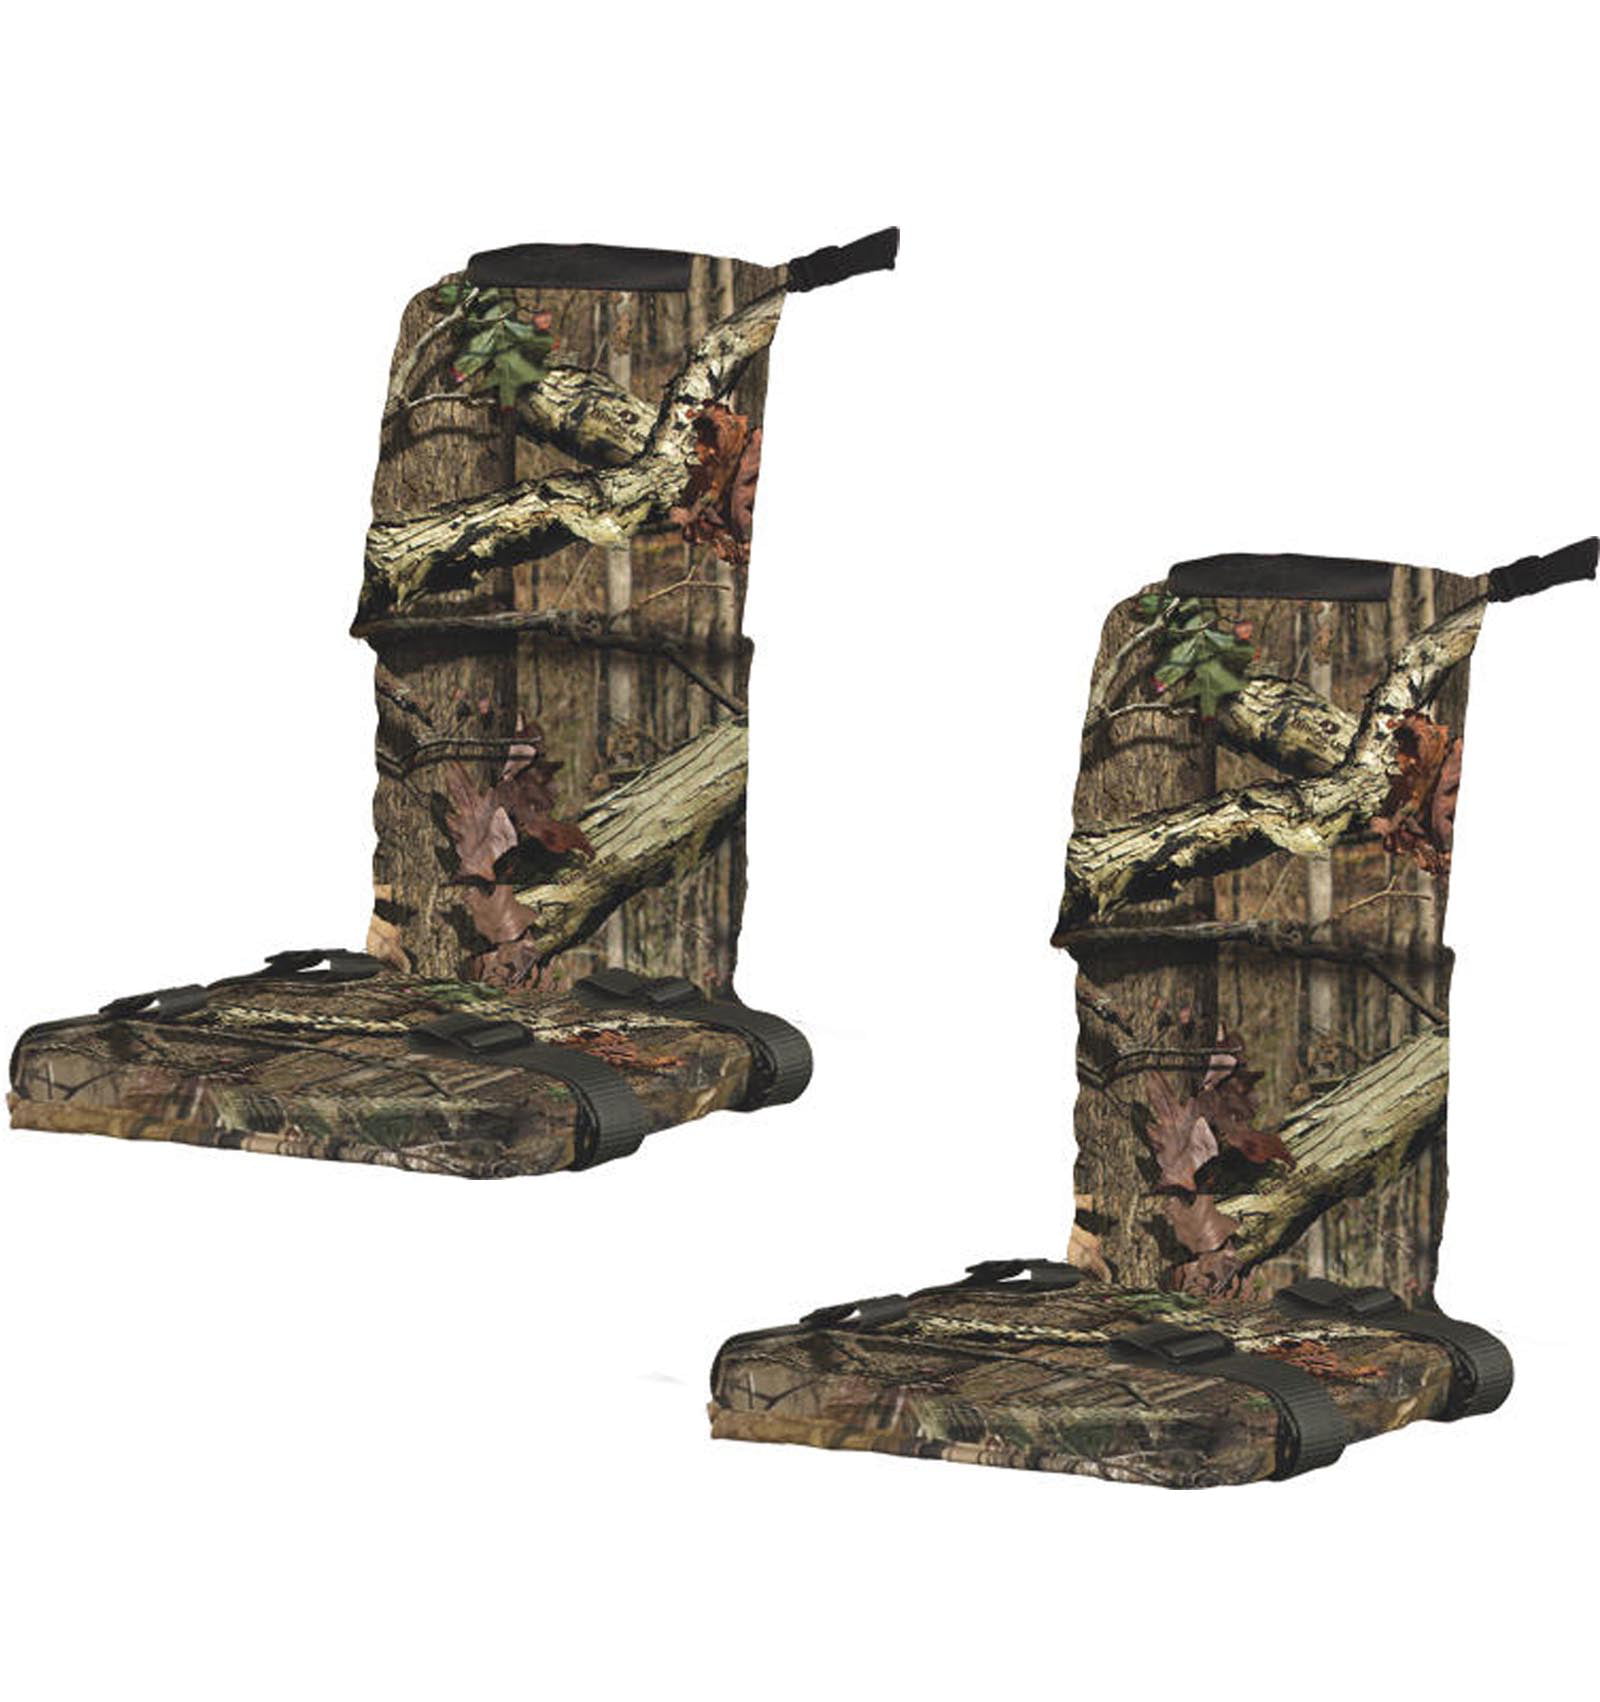 Summit Treestands Universal Seat Mossy Oak Camo Removable Replacement 